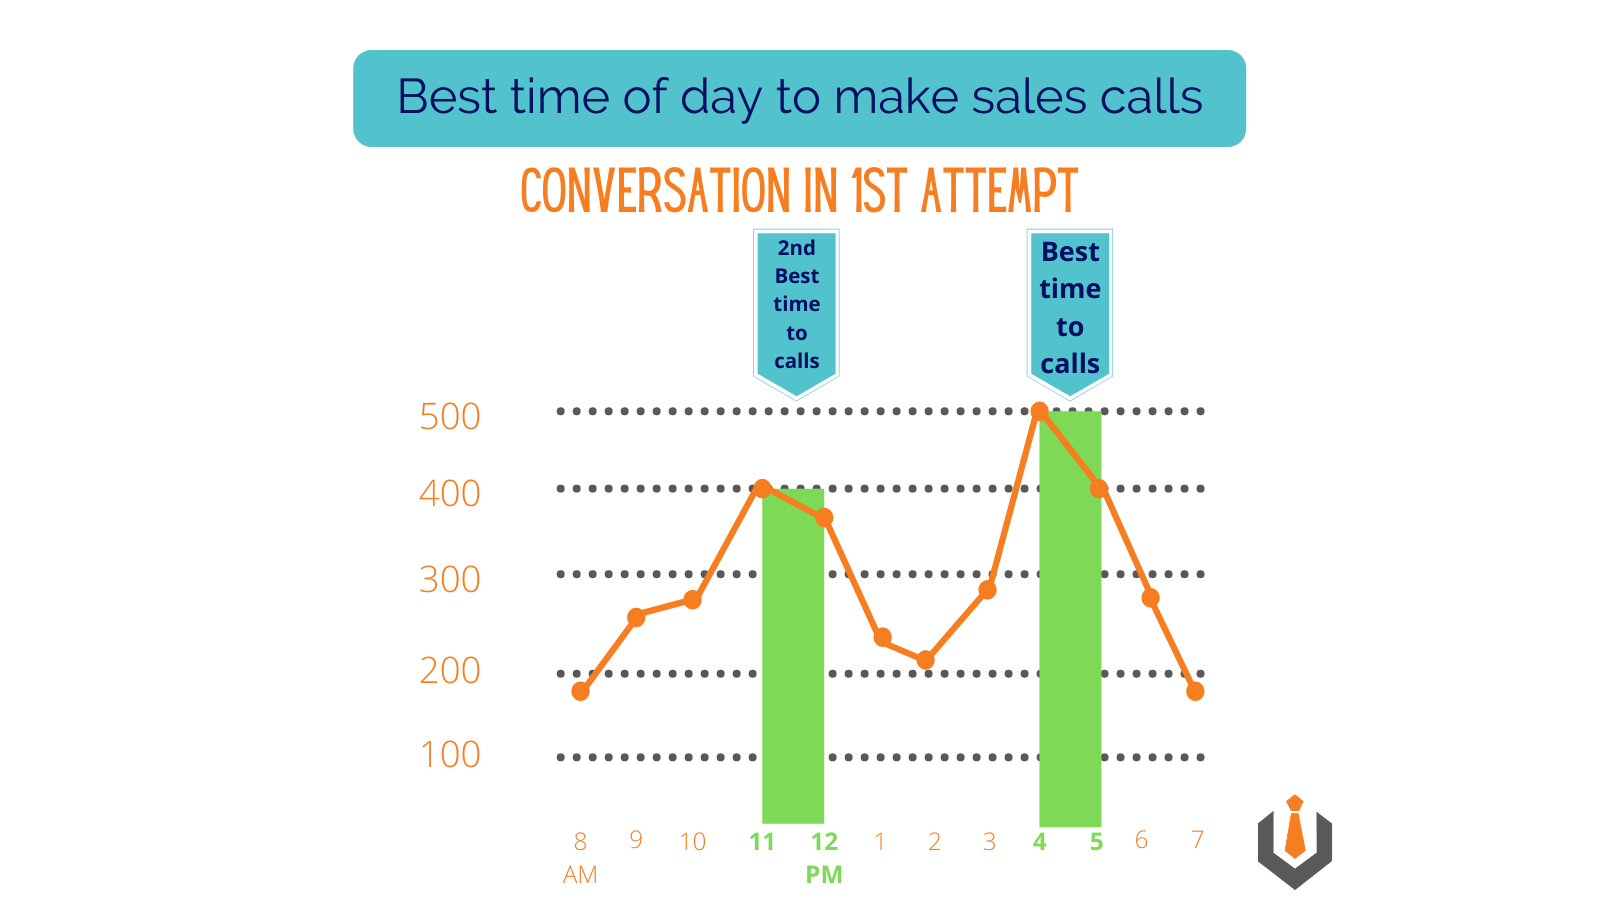 Best time to call during day